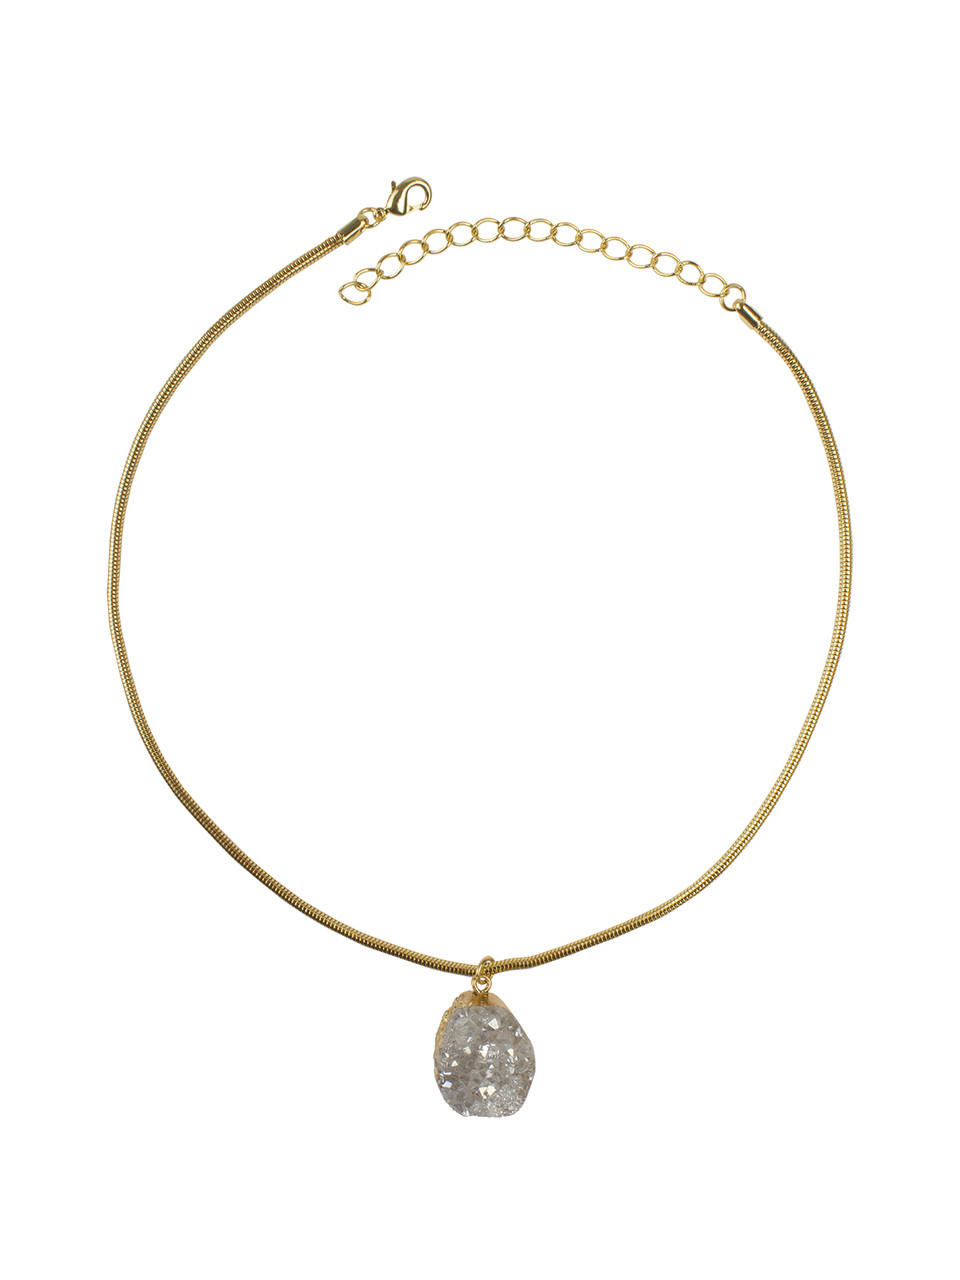 Ivory Tag Beau Mignon Crystal Stone Necklace with Gold Leafing - In-Sattva